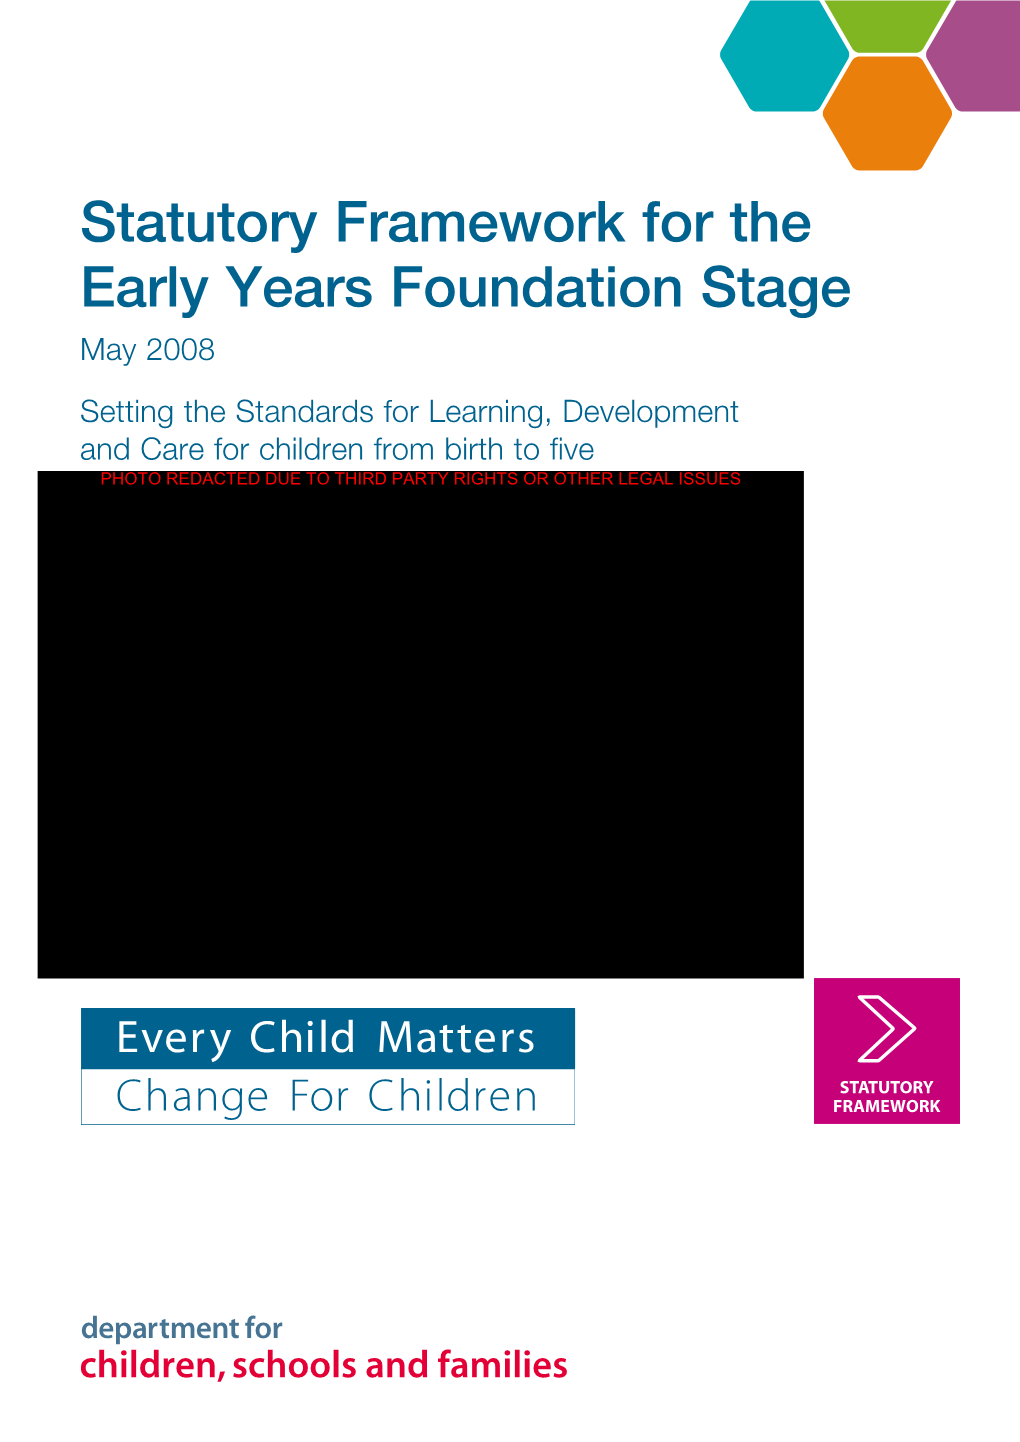 Statutory Framework for the Early Years Foundation Stage